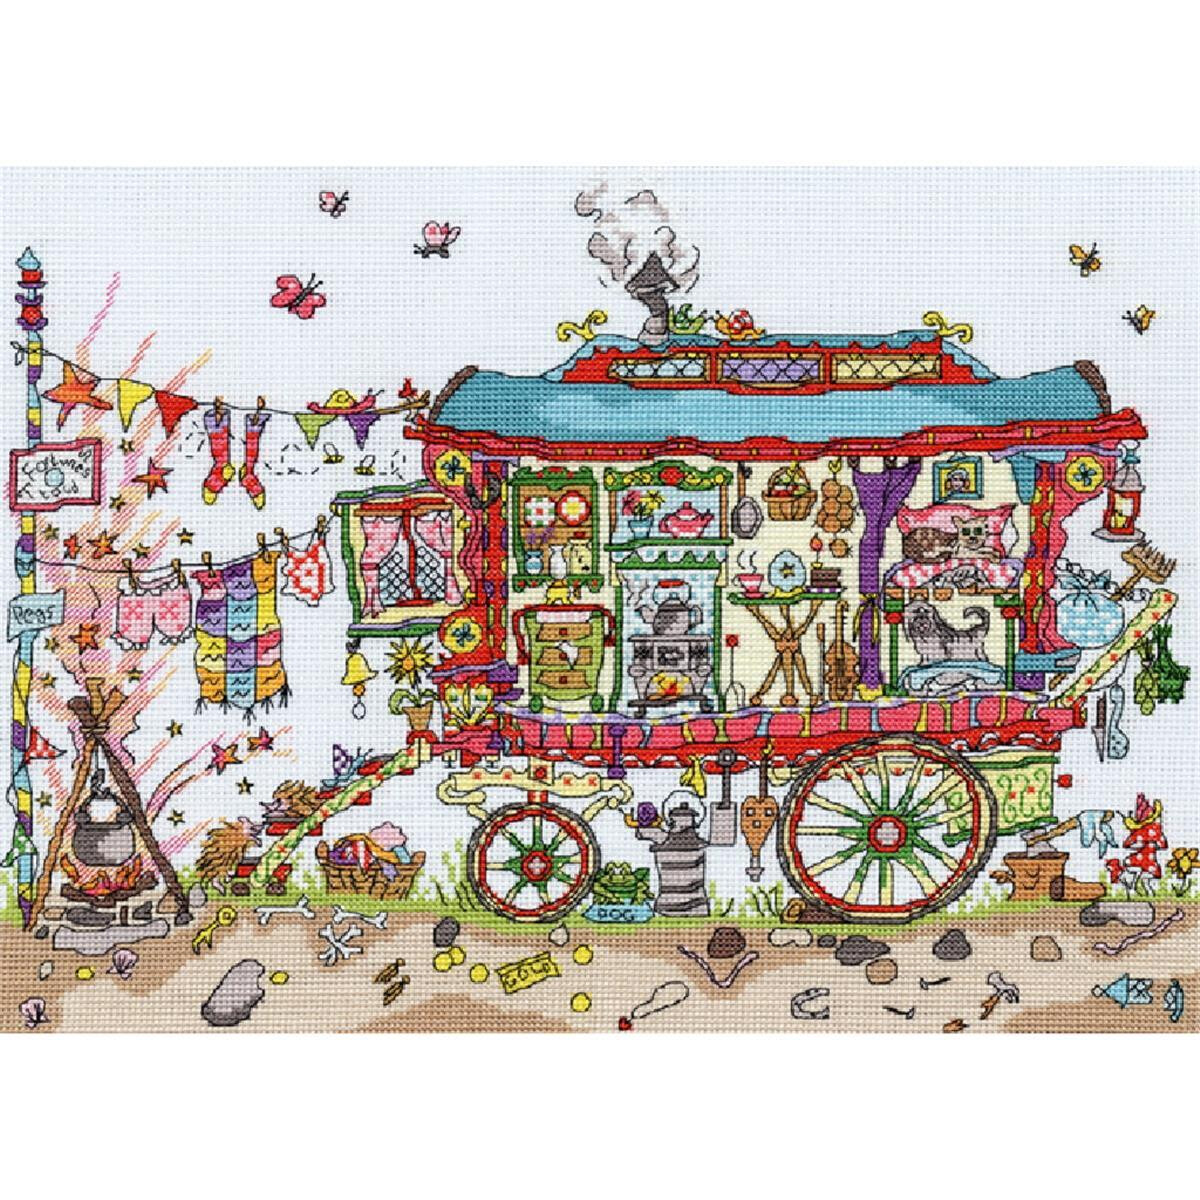 A colorful, whimsical embroidery depicting a gypsy wagon...